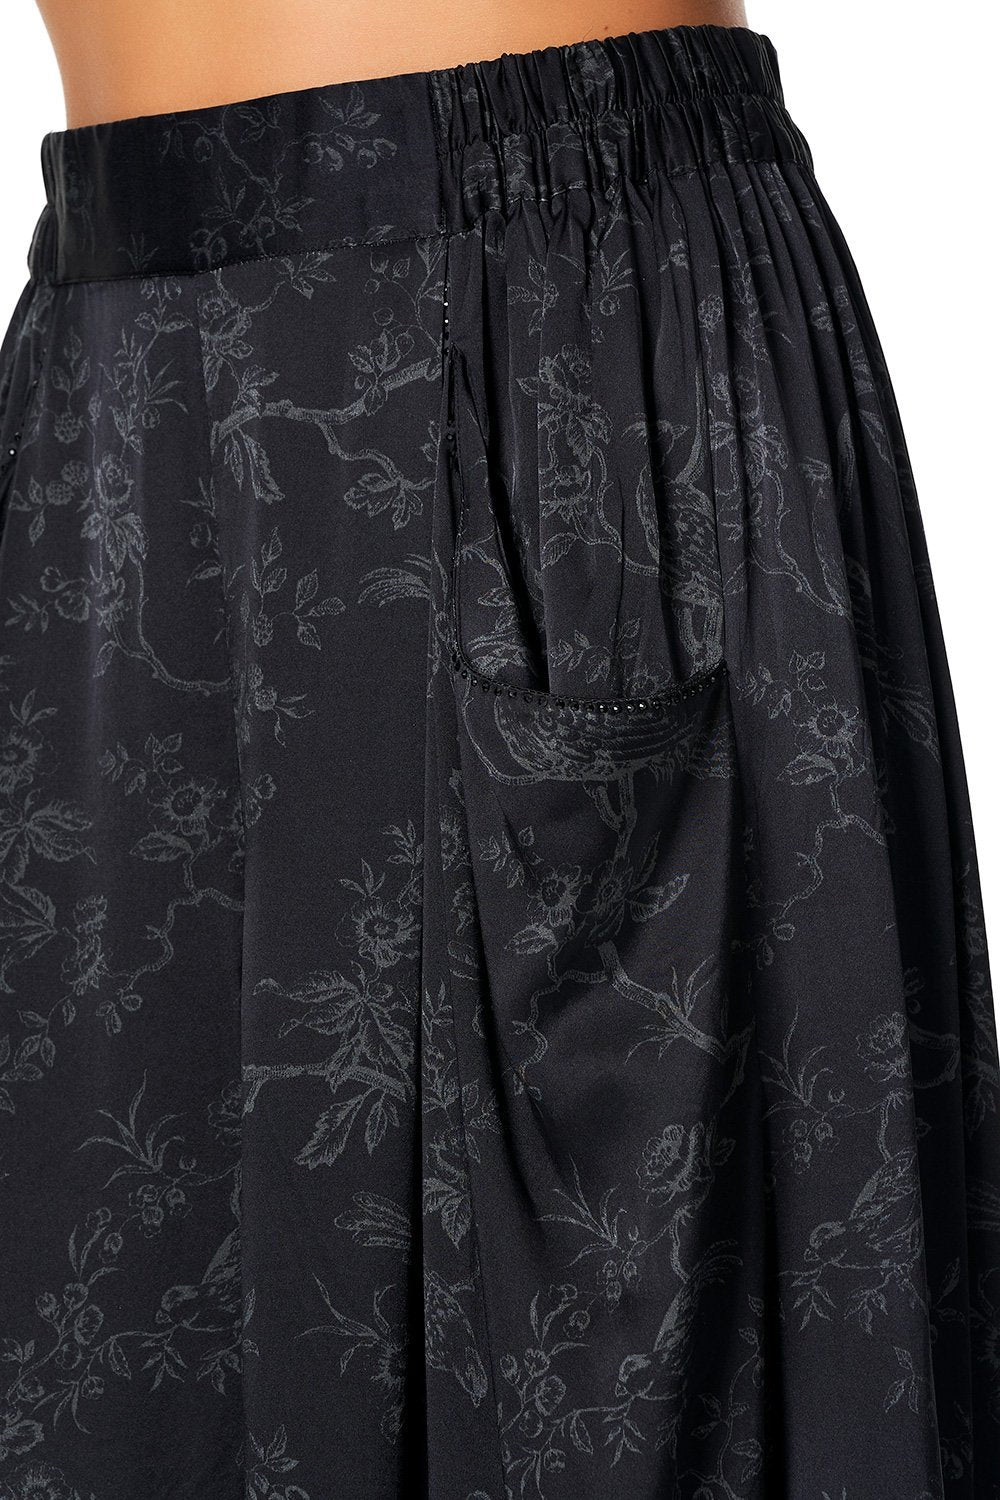 WIDE LEG PANT WITH GATHERED POCKETS NOIR BOUDOIR